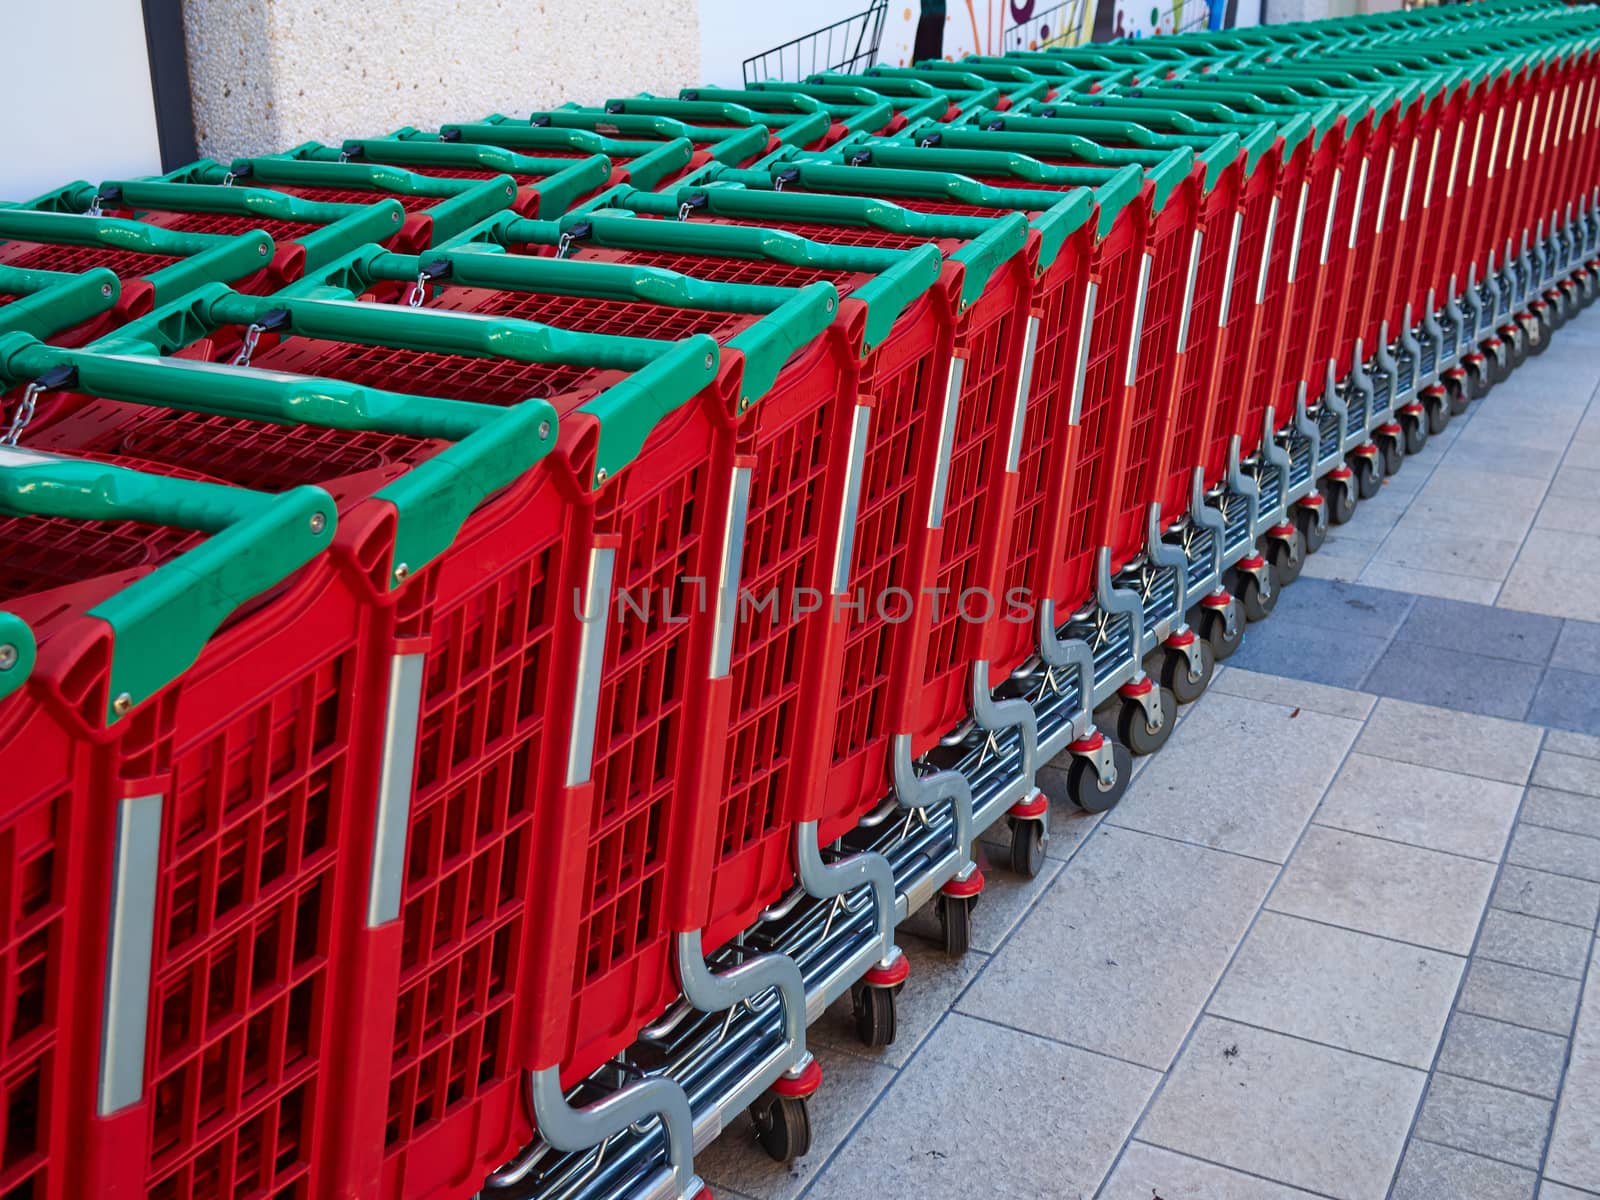 Line of supermarket shopping cart trolley by Ronyzmbow